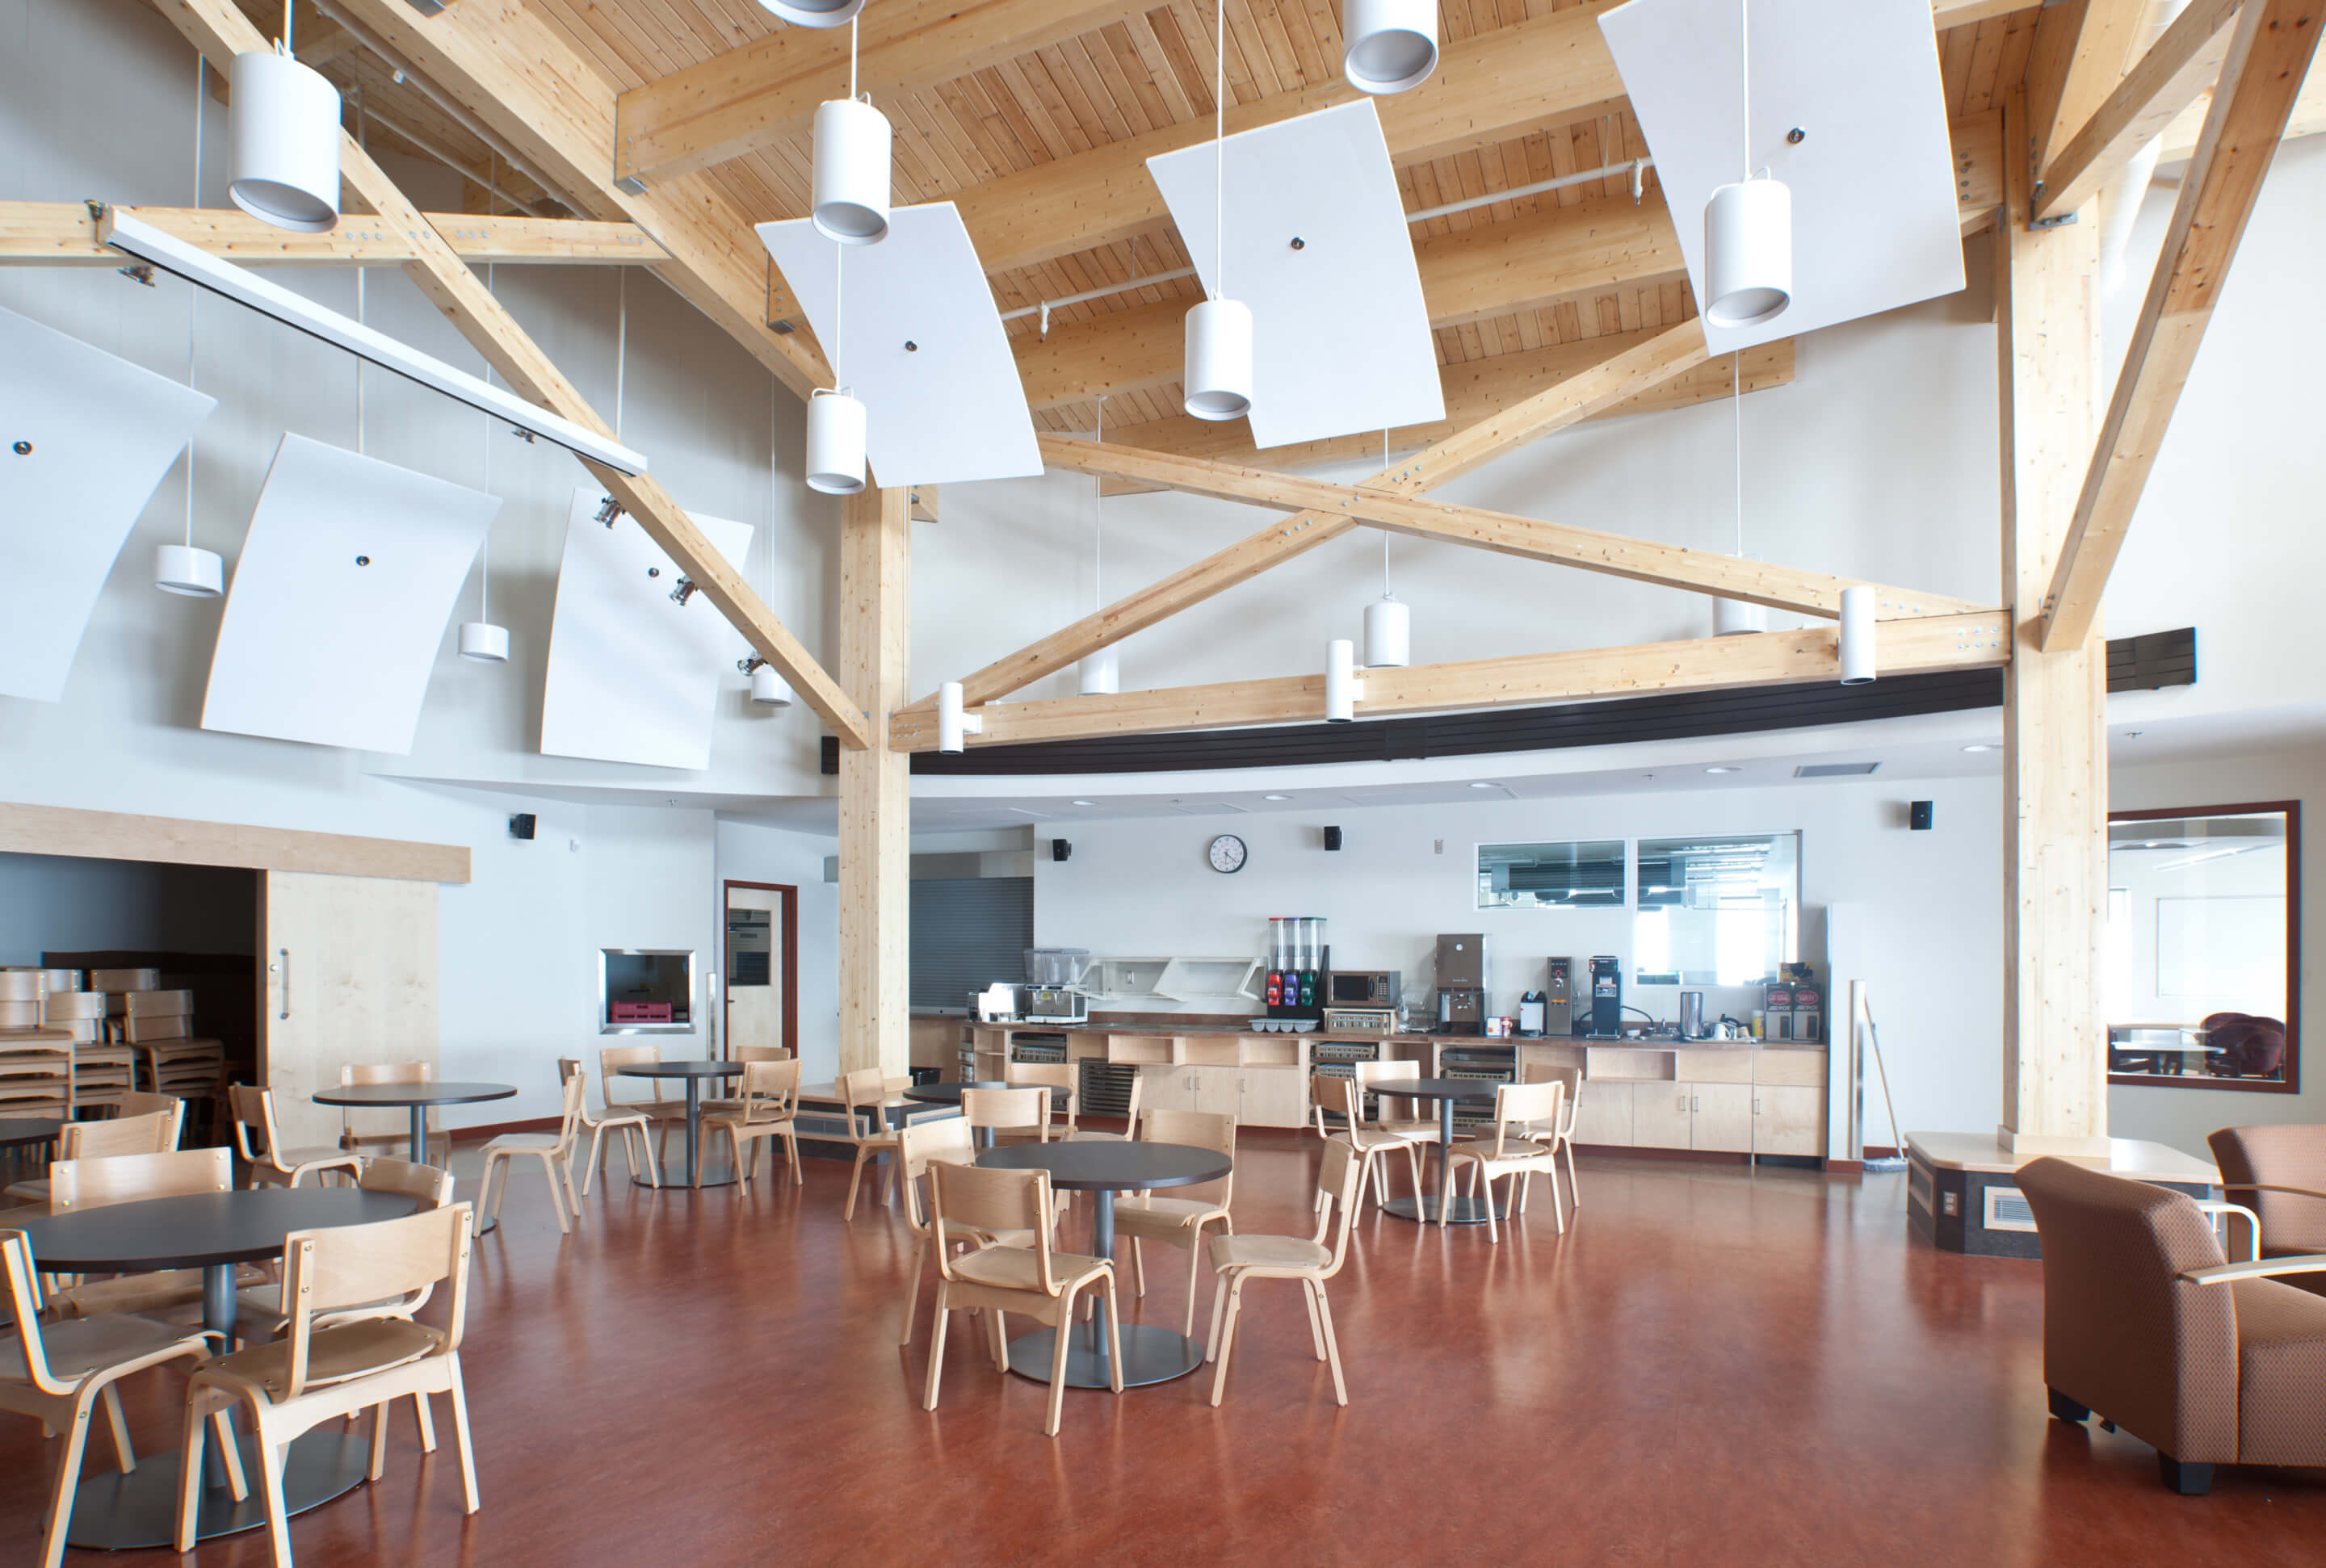 interior of a timber conference room with glulam beams